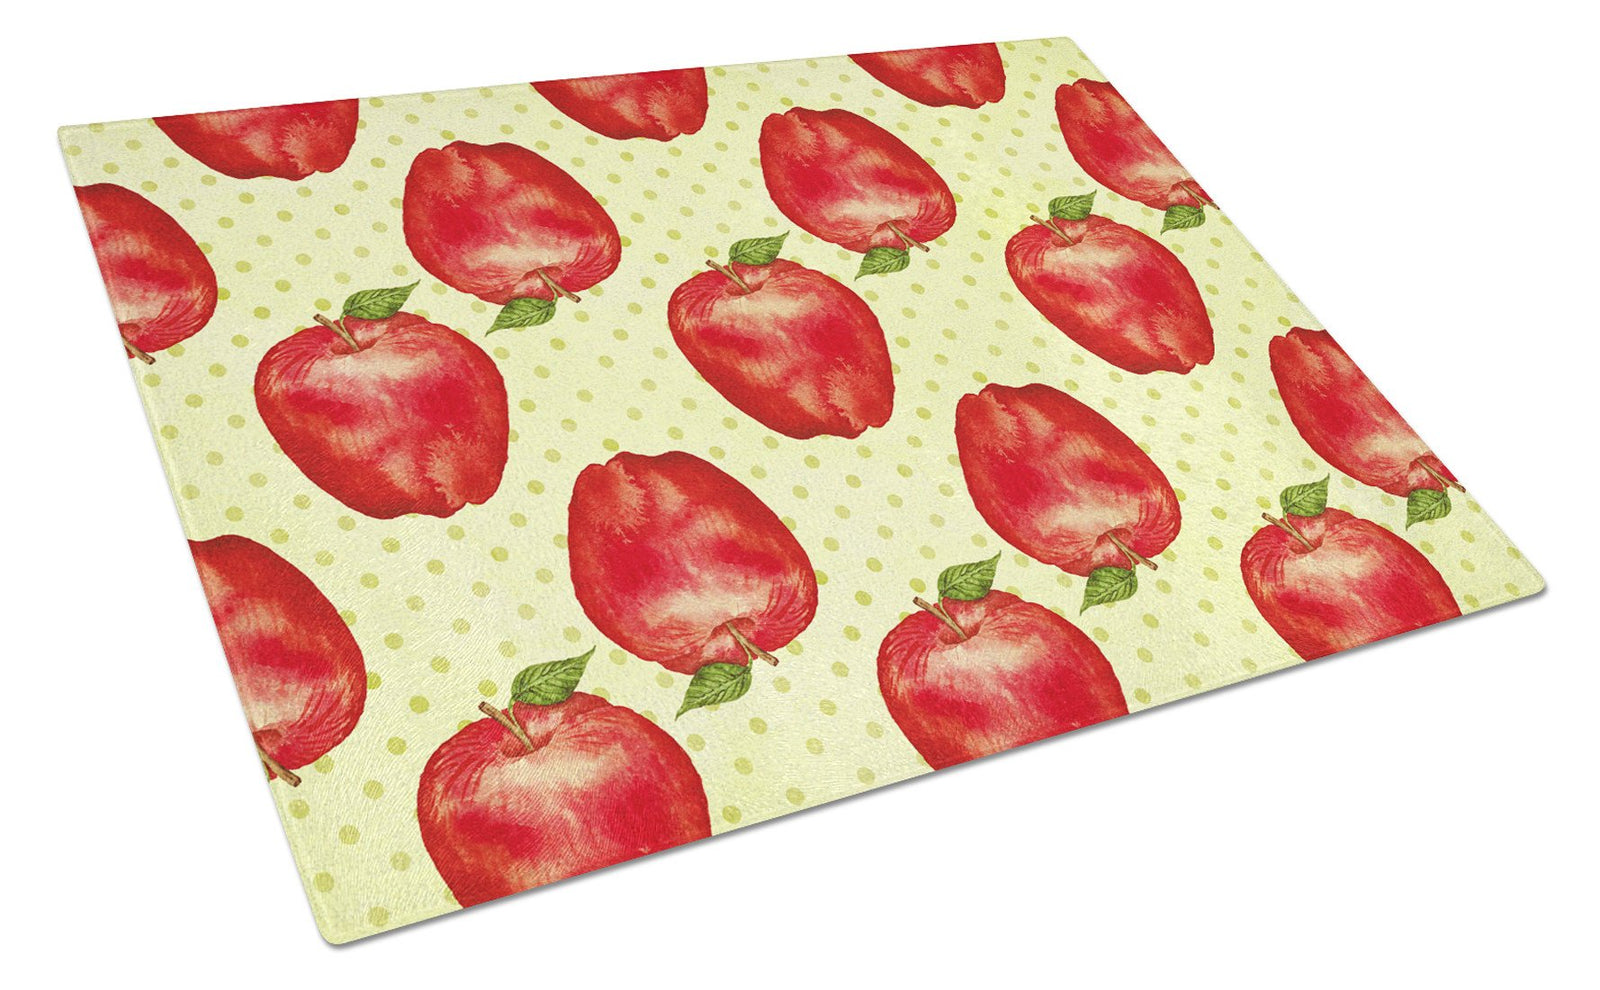 Watercolor Apples and Polkadots Glass Cutting Board Large BB7516LCB by Caroline's Treasures